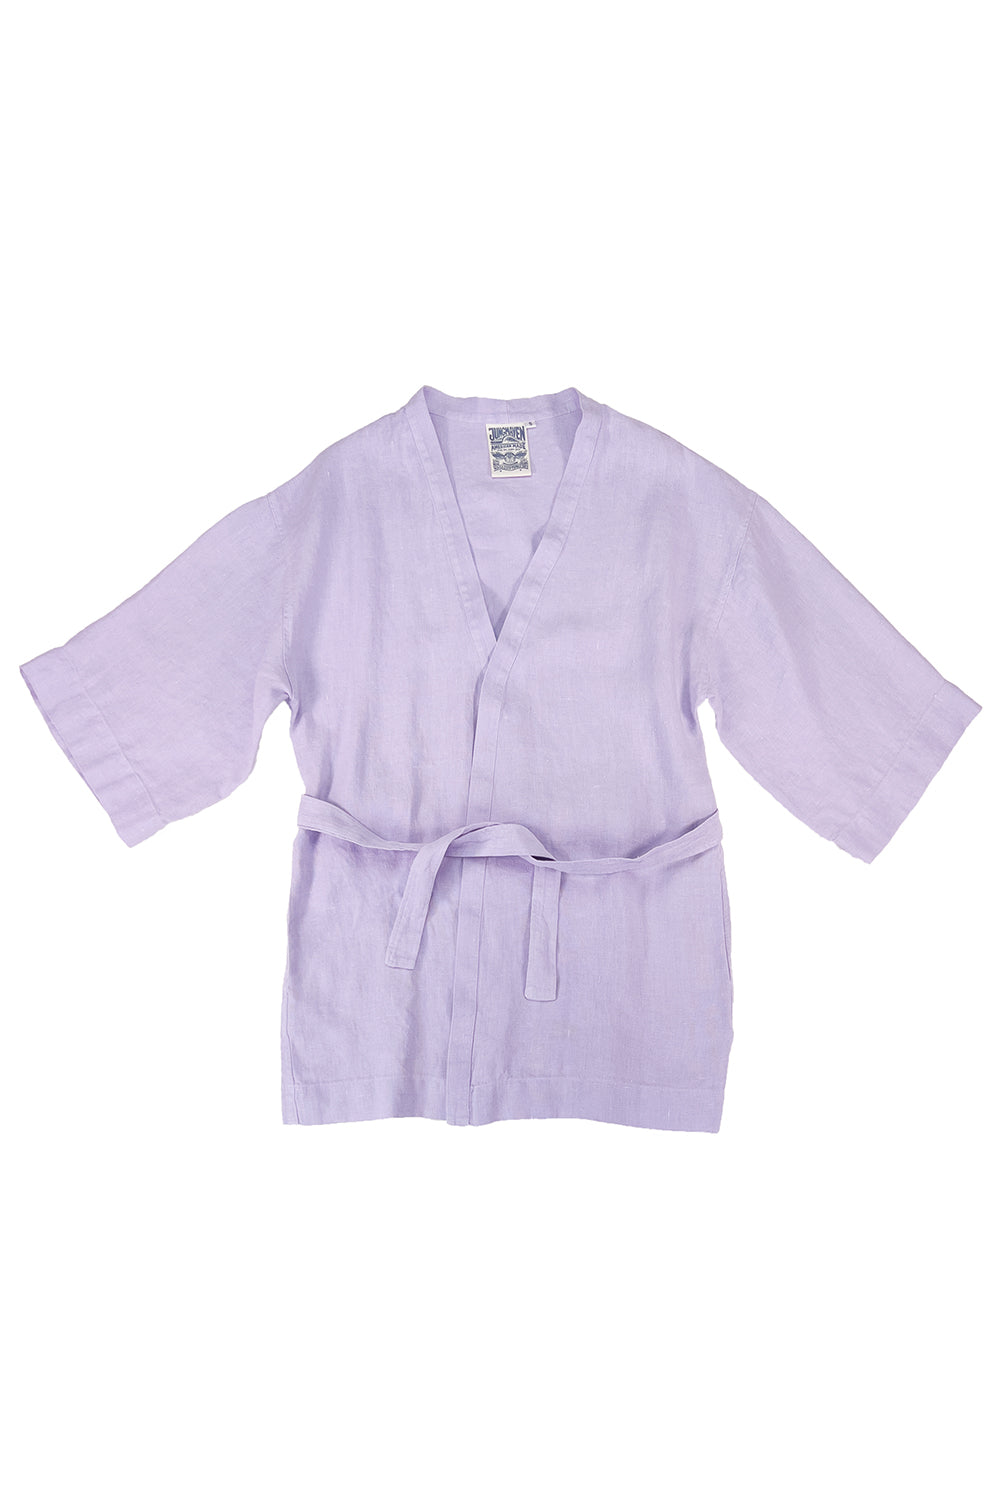 Bali Cover-up | Jungmaven Hemp Clothing & Accessories / Color: Misty Lilac